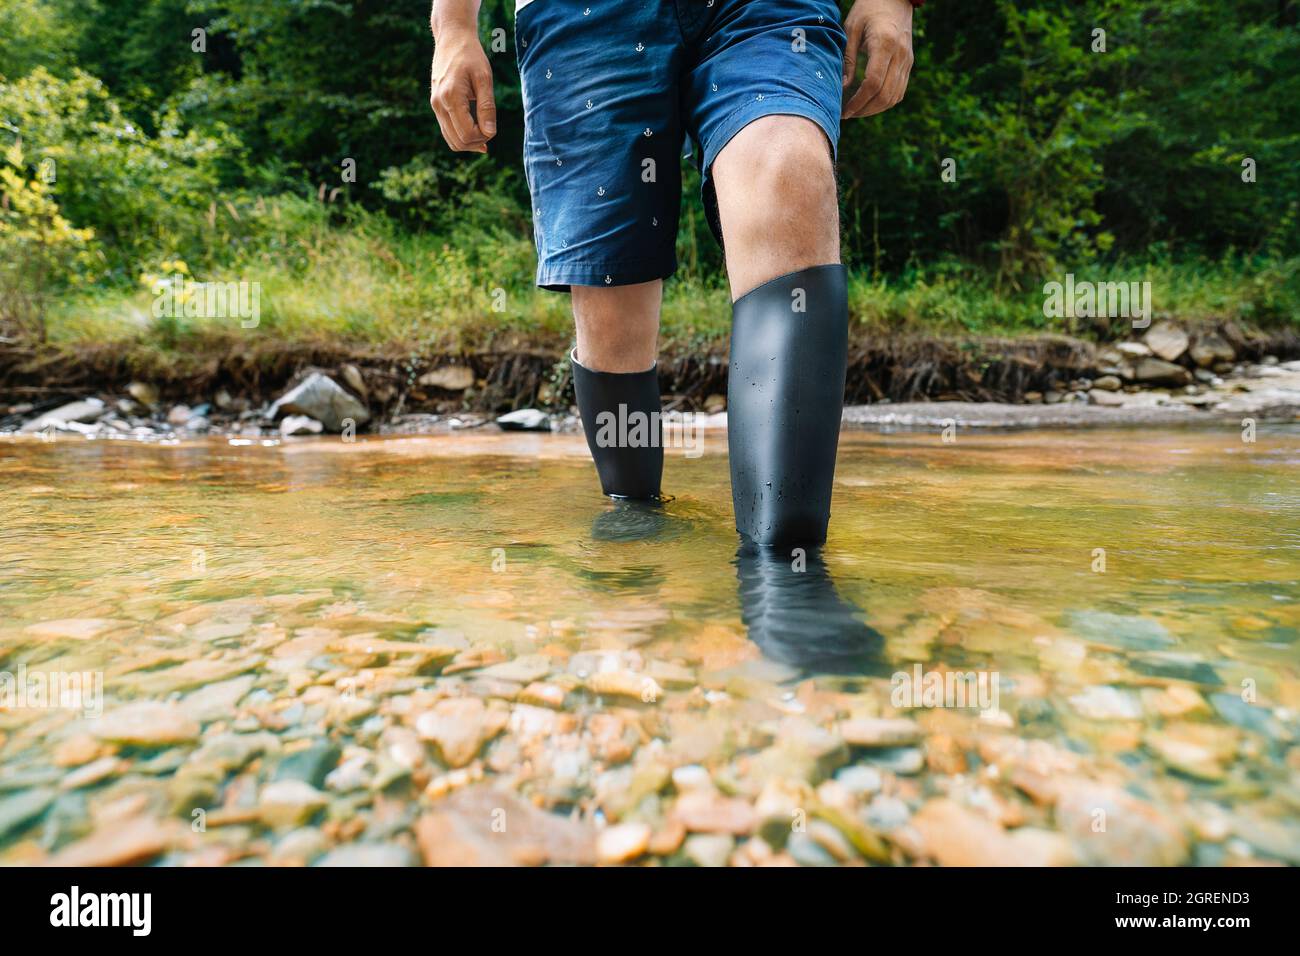 Man In Rubber Boots Walking In The River Stock Photo - Alamy